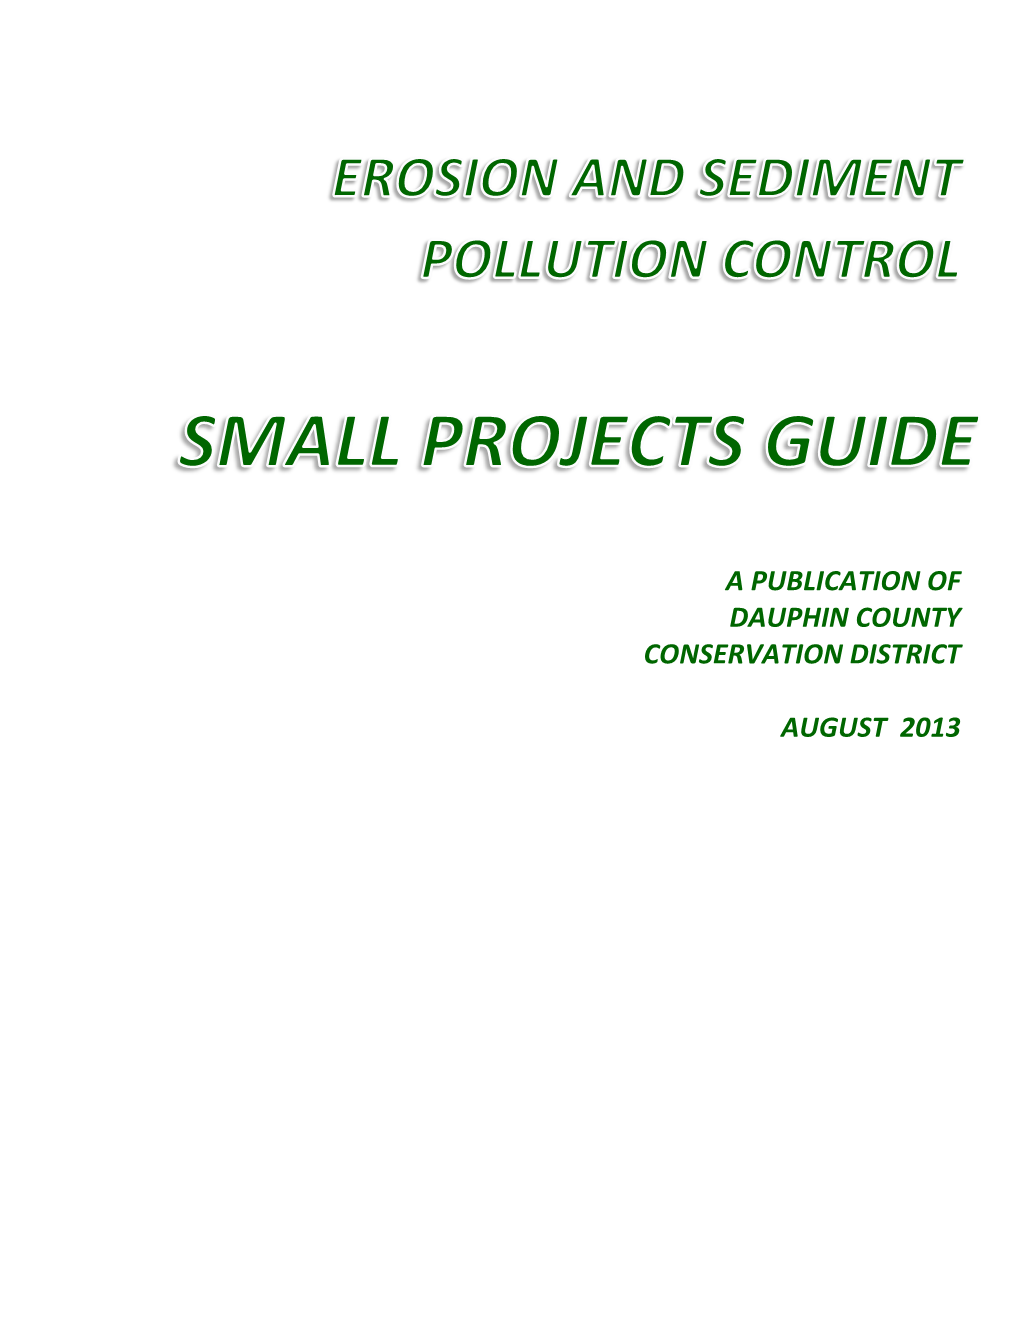 Erosion and Sediment Pollution Control Plan for Small Projects Guide